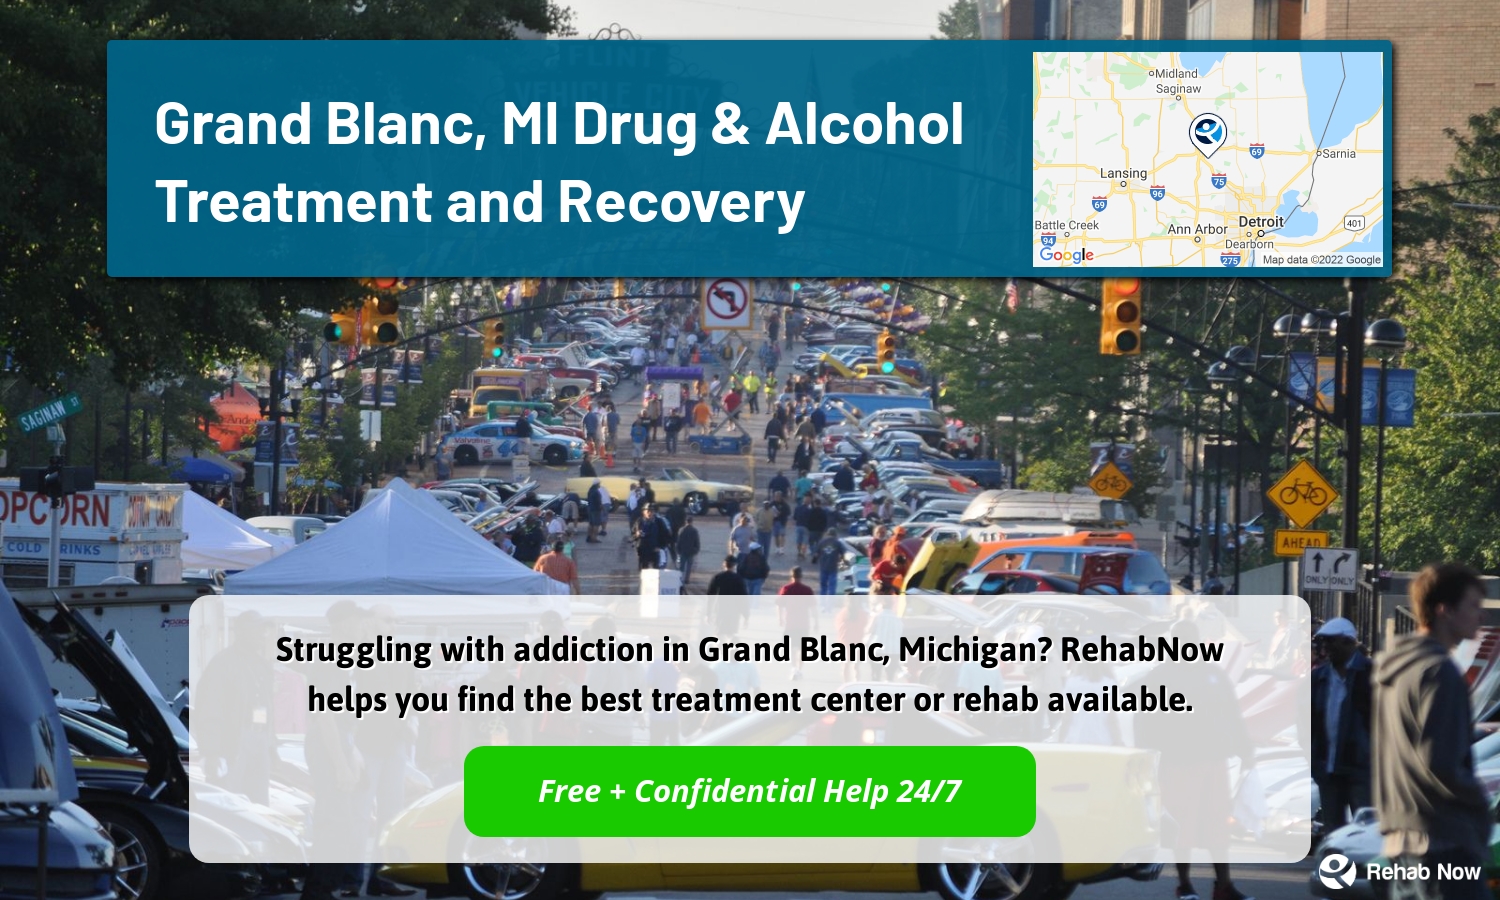 Struggling with addiction in Grand Blanc, Michigan? RehabNow helps you find the best treatment center or rehab available.